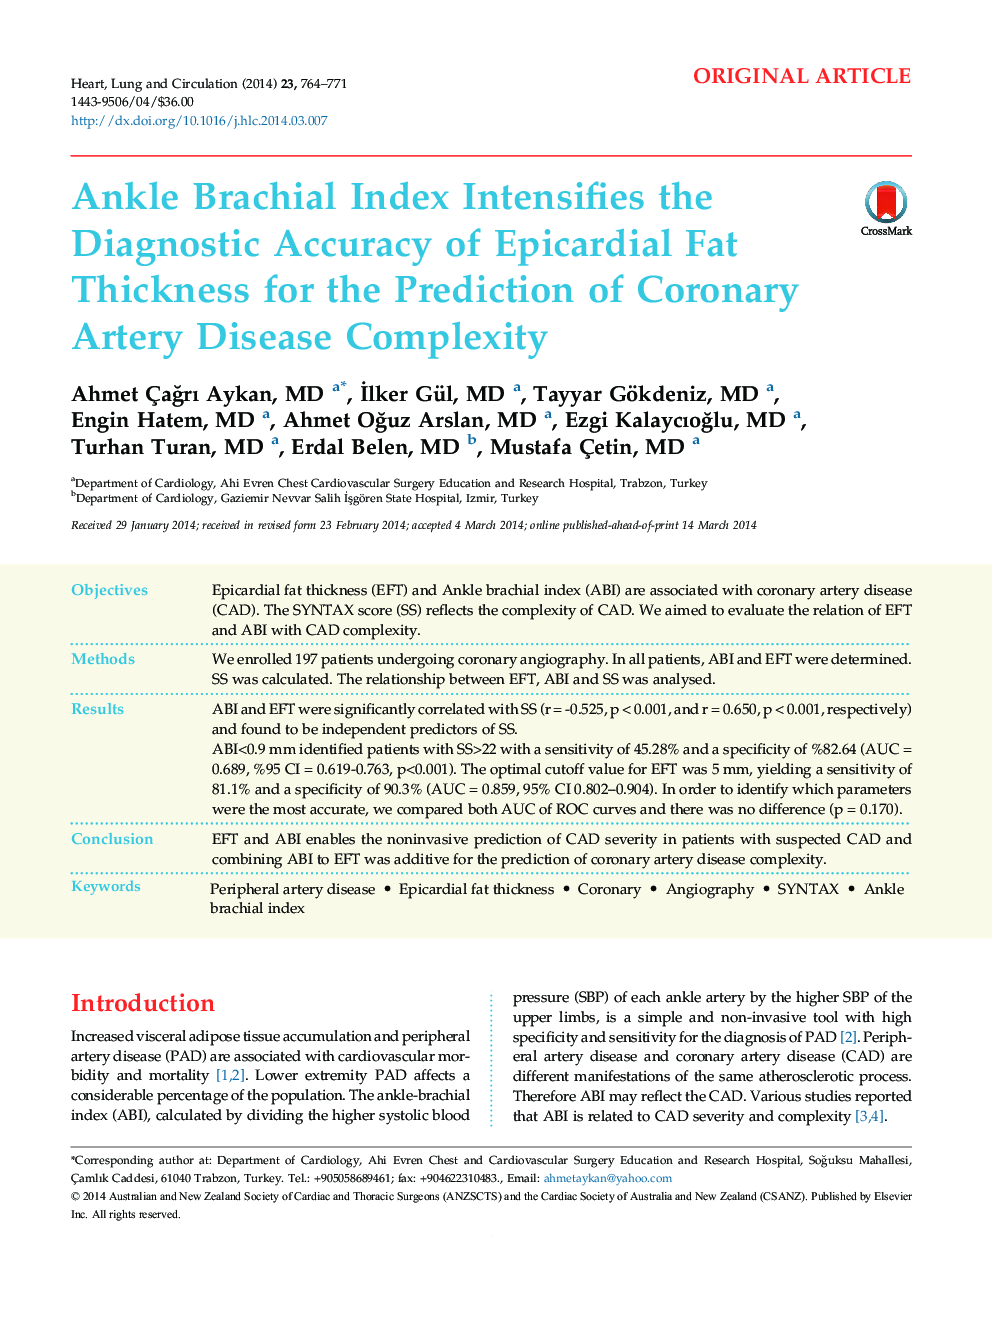 Ankle Brachial Index Intensifies the Diagnostic Accuracy of Epicardial Fat Thickness for the Prediction of Coronary Artery Disease Complexity